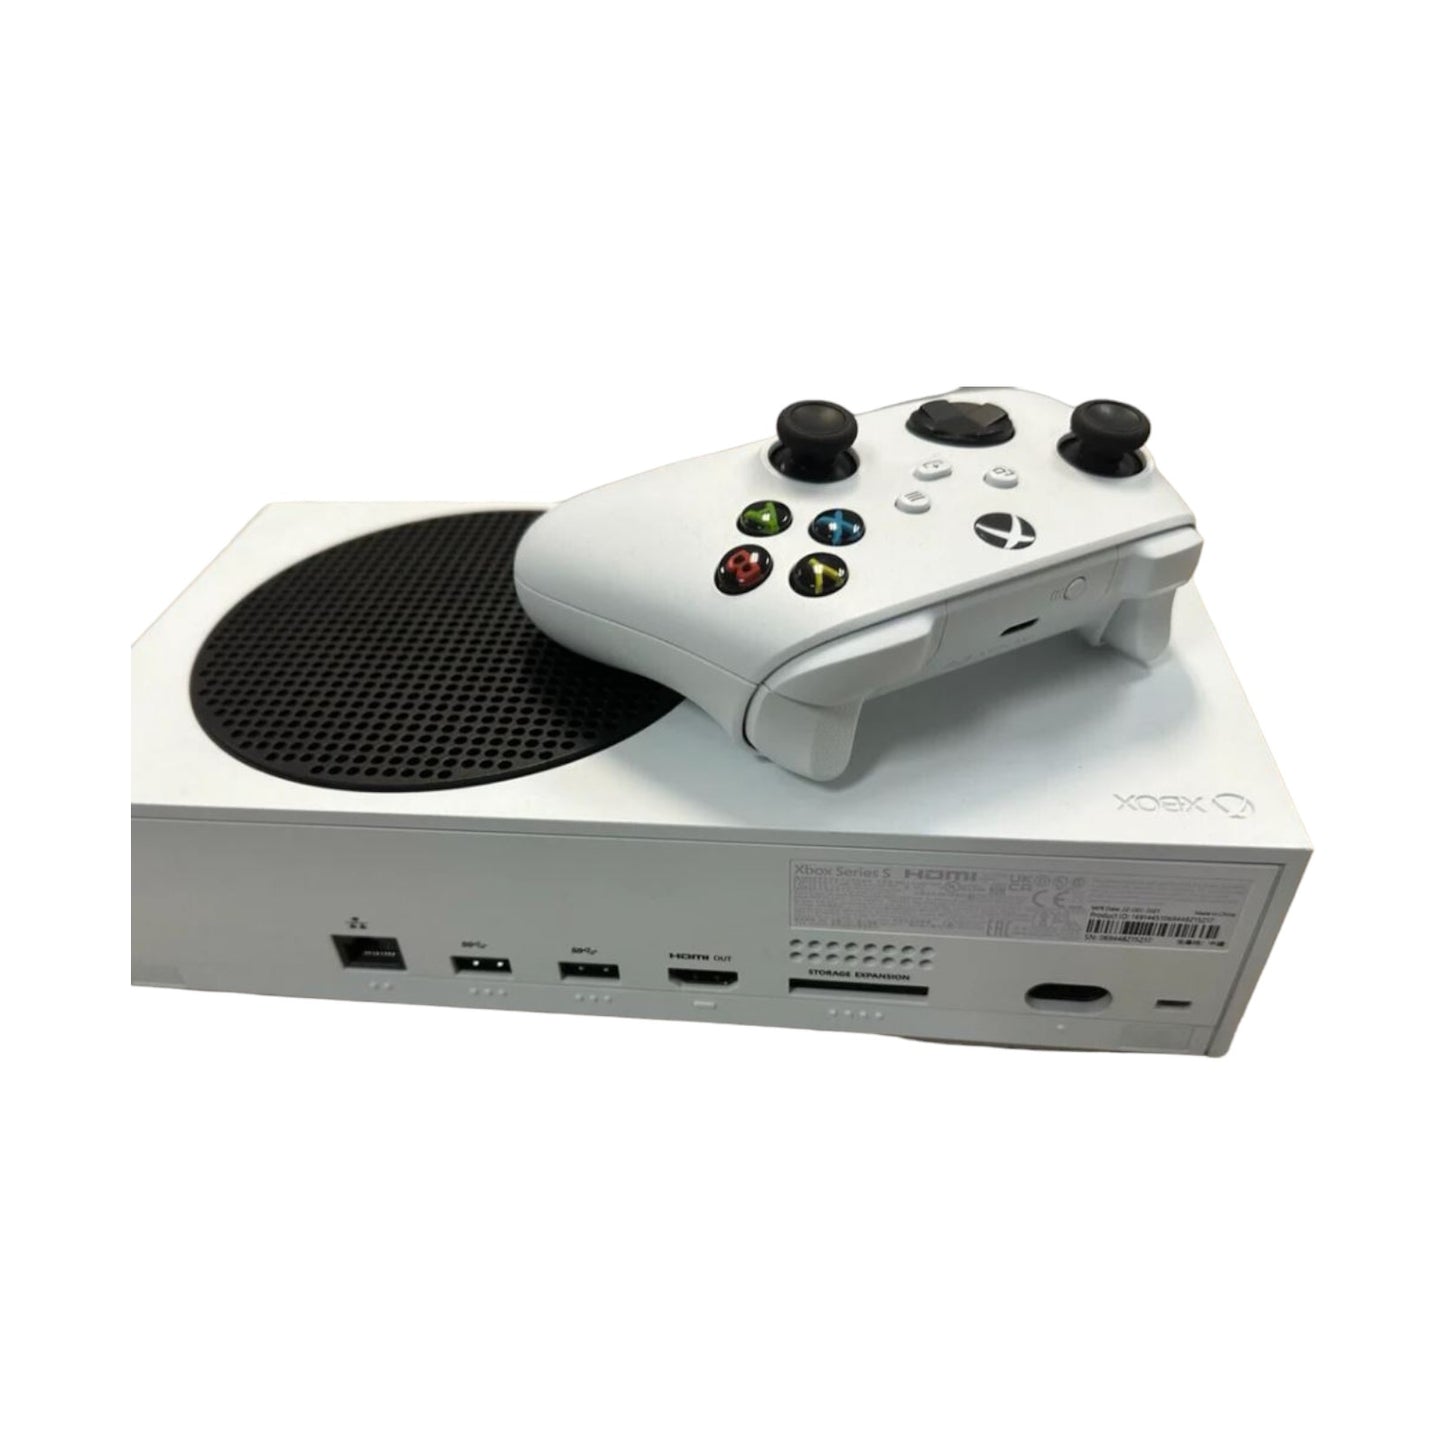 Microsoft Xbox Series S White 512GB Very Good - 1 Controller + HDMI/Power Cable